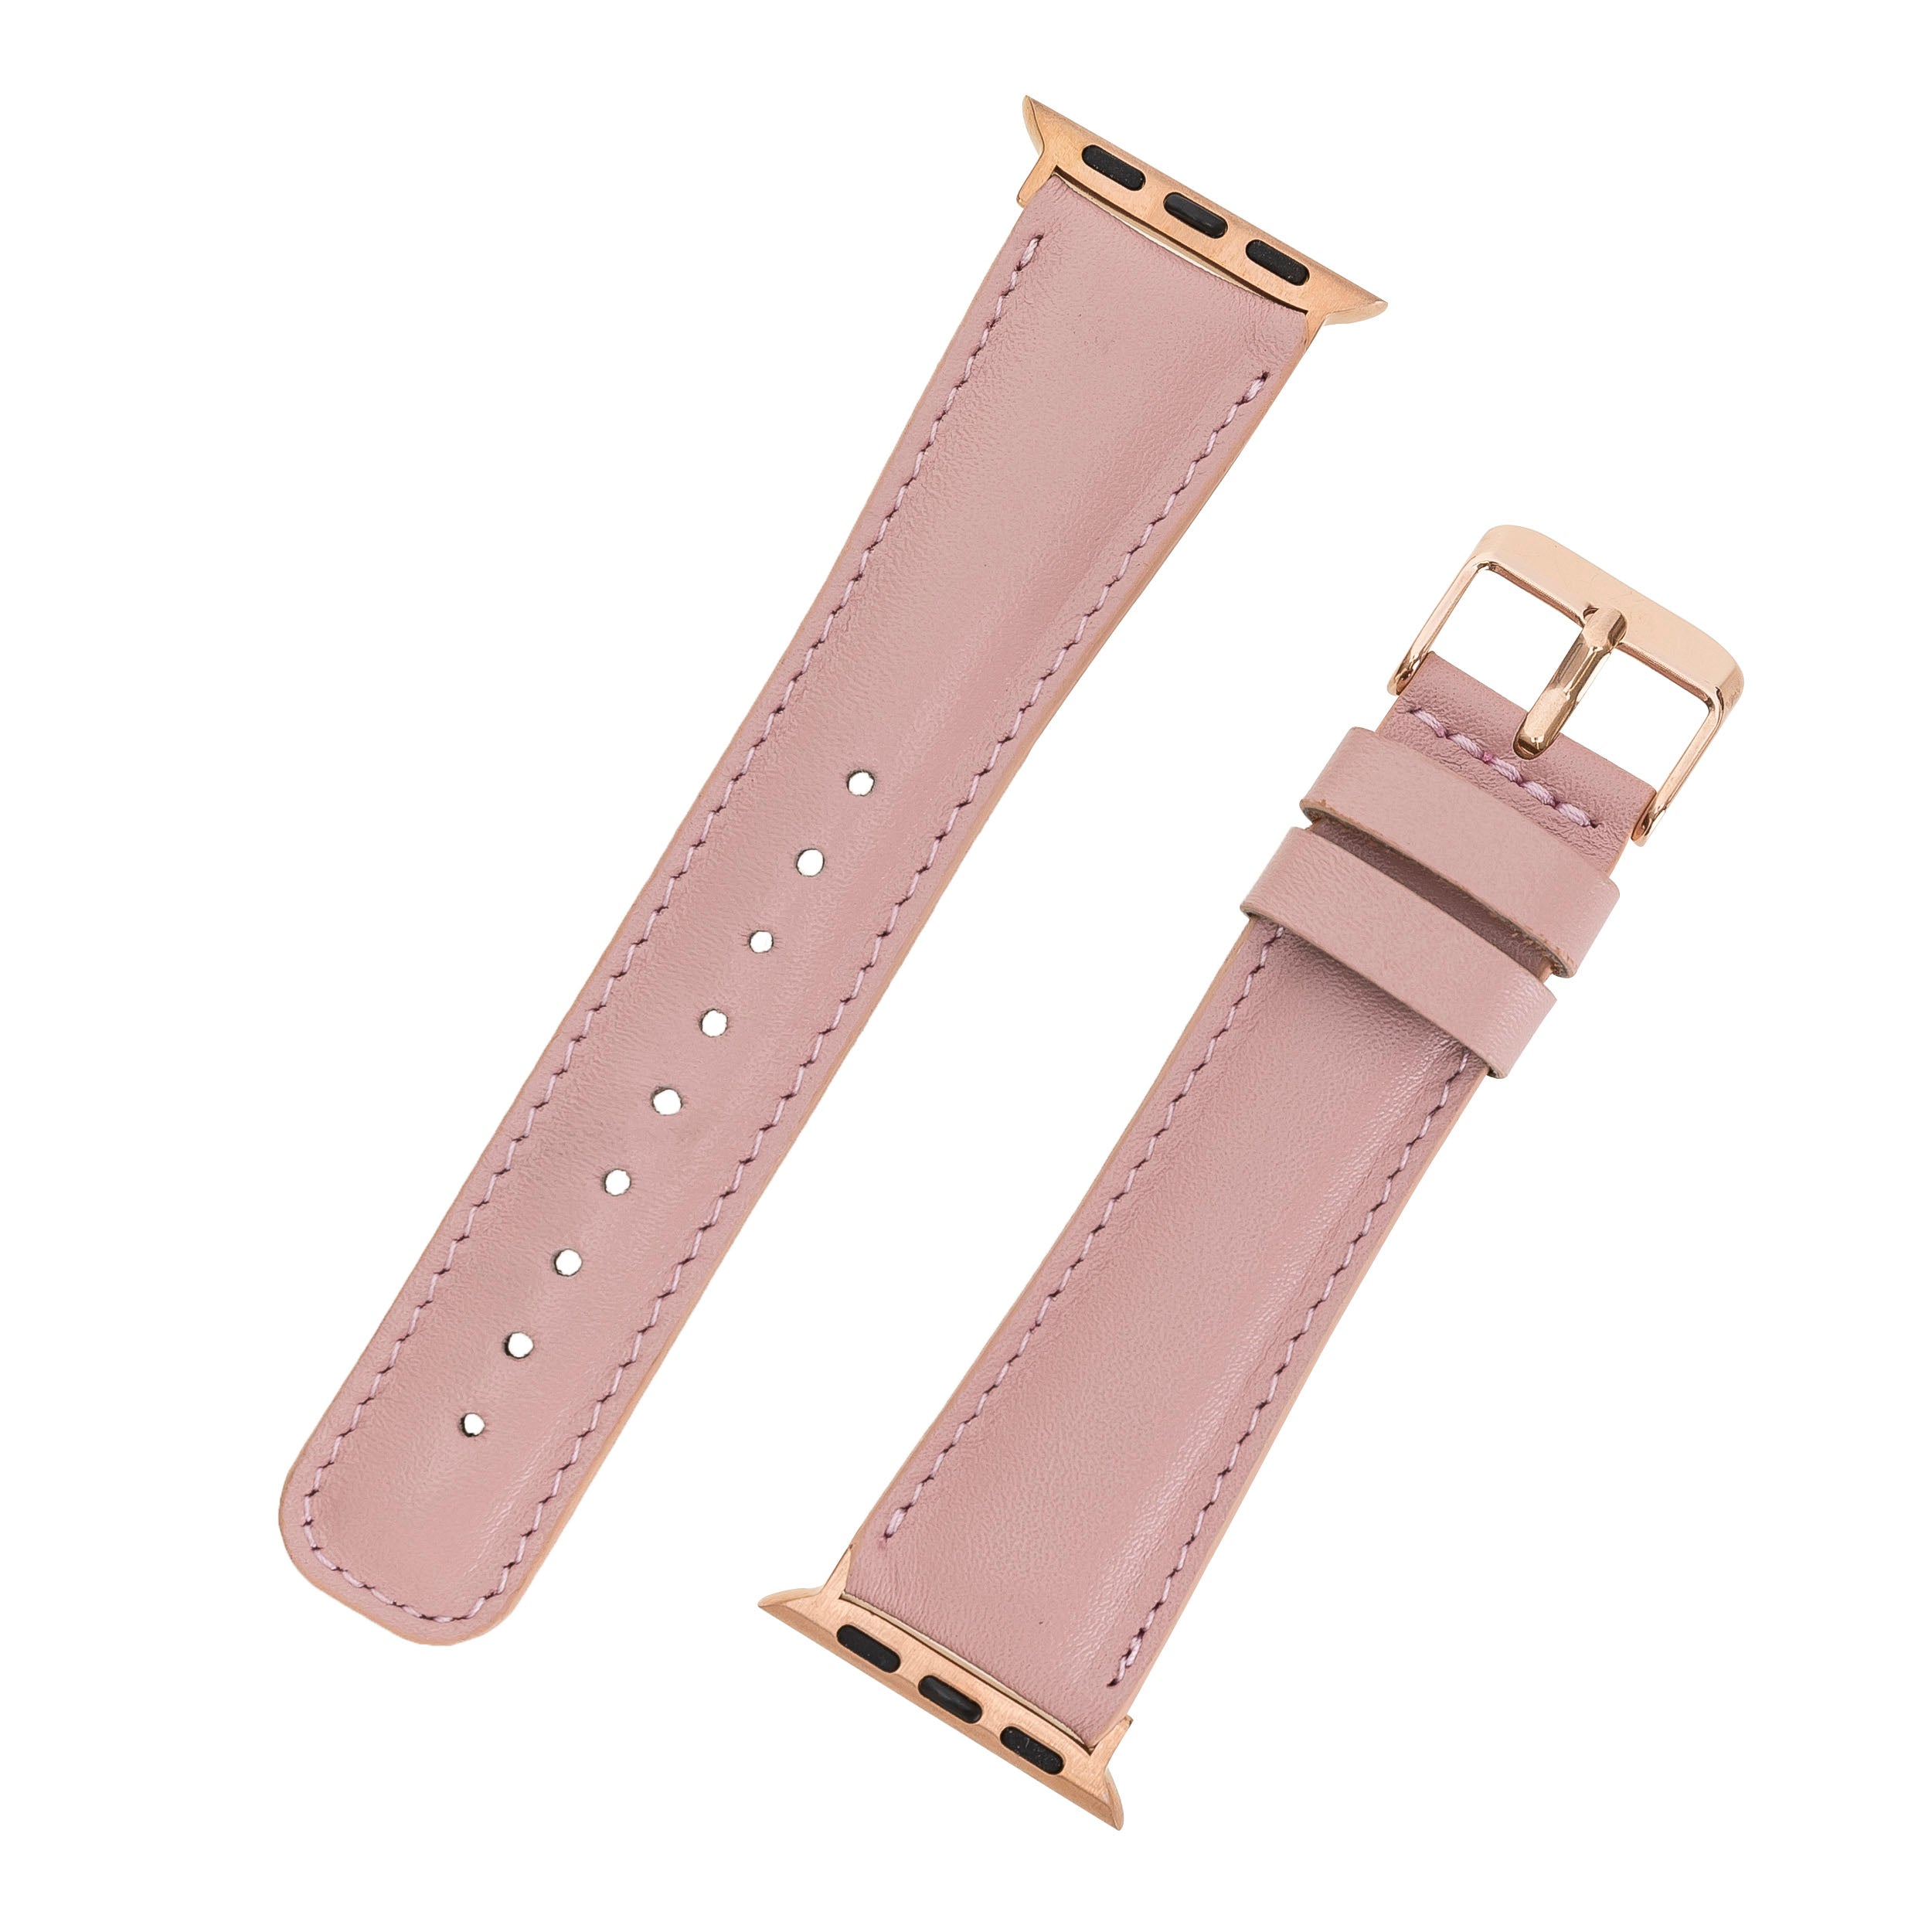 DelfiCase Liverpool Collection Leather Watch Band for Apple & Fitbit Versa Watch Band 13